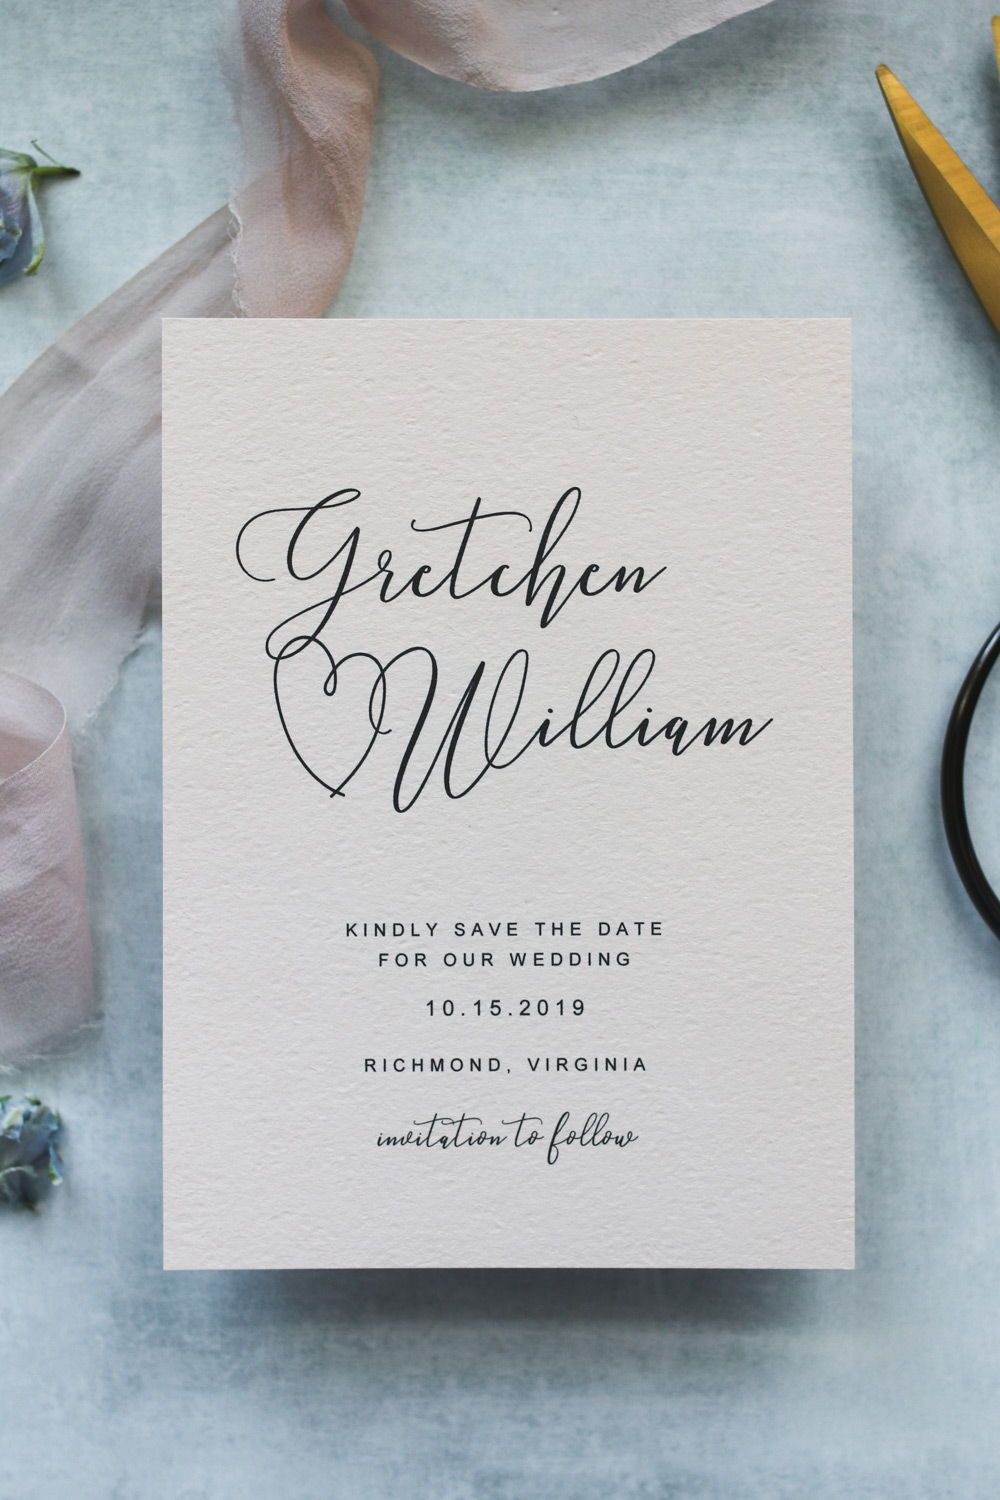 Free Save The Date Templates | Save The Date Ideas | Save The Date - Free Printable Save The Date Invitation Templates